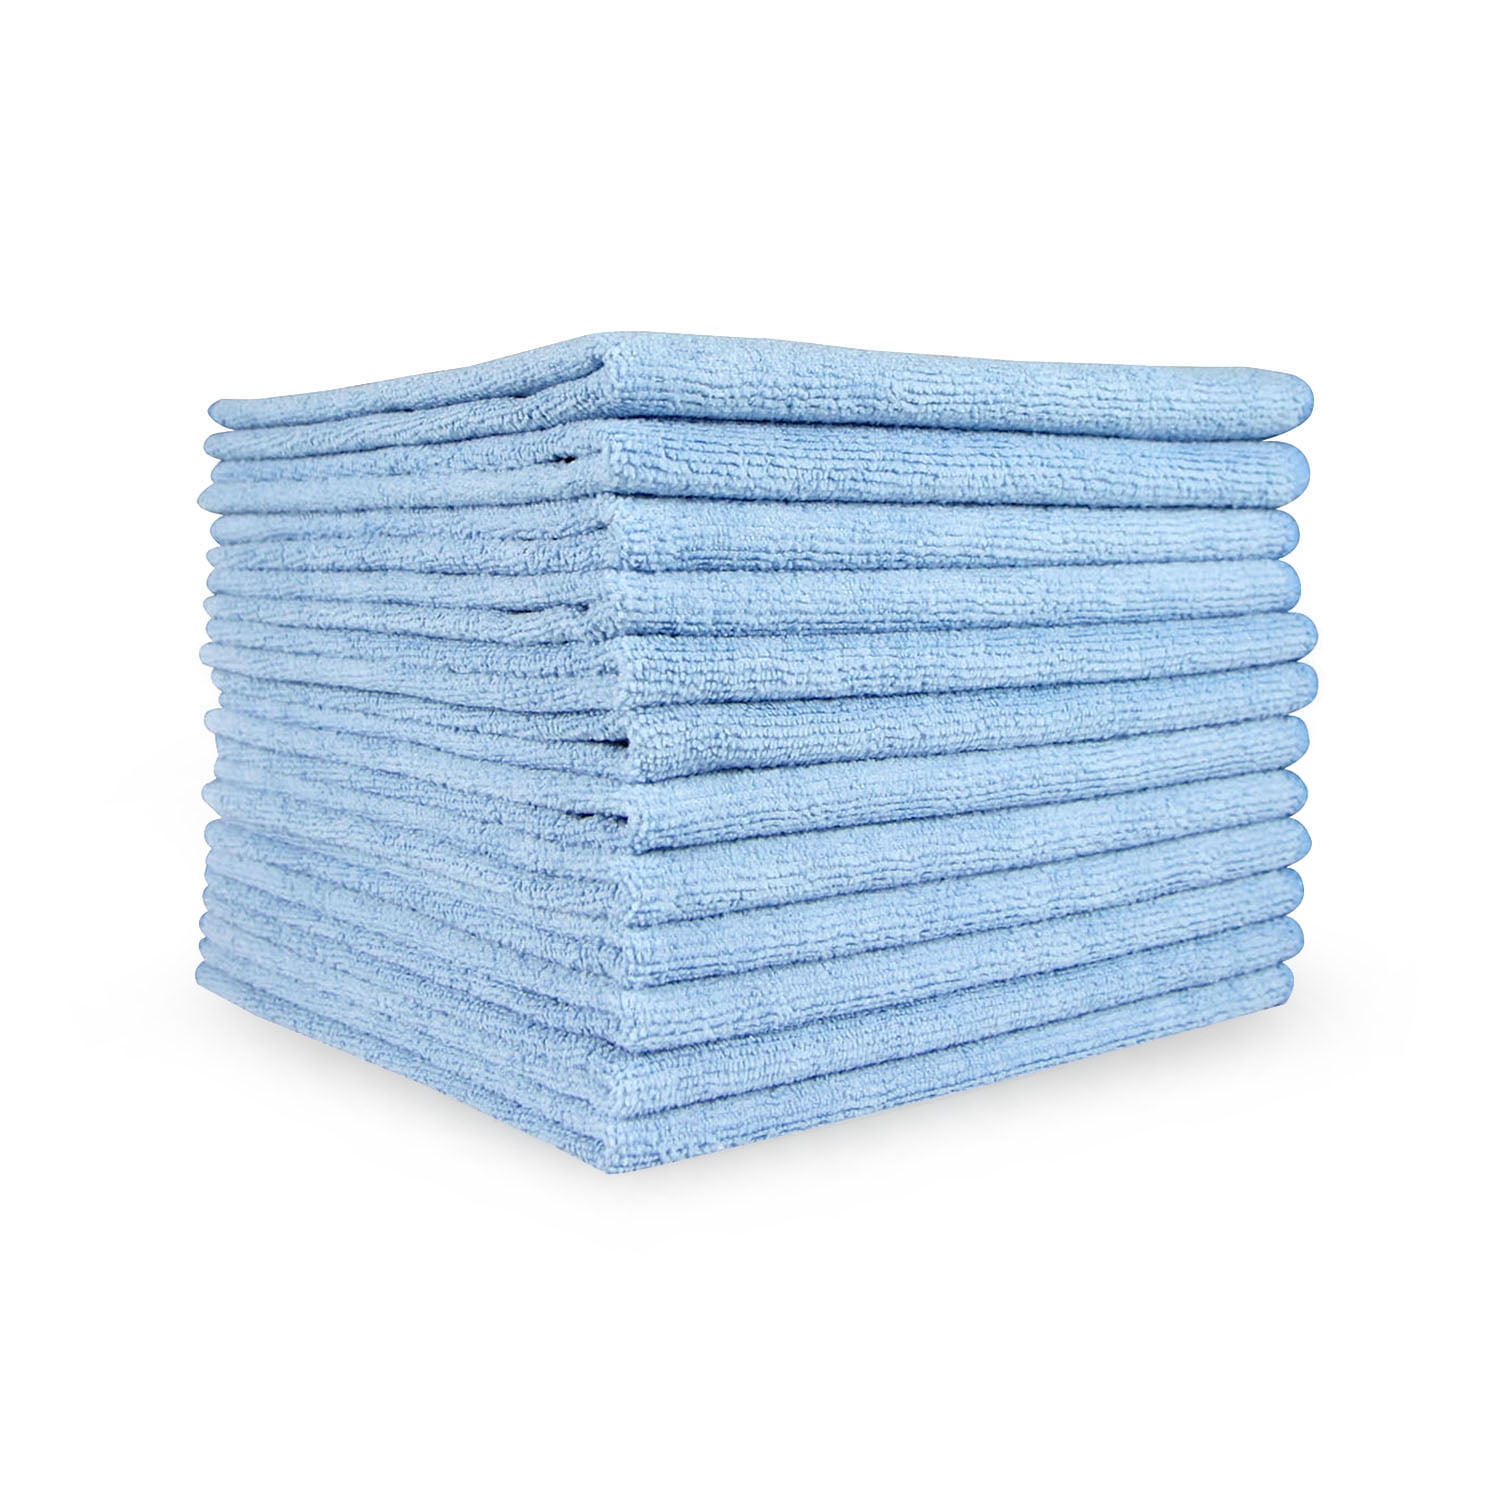 Cleaning Cloth for Home Blue Microfibre Exel Cloths 50 Pack Cars and Work 